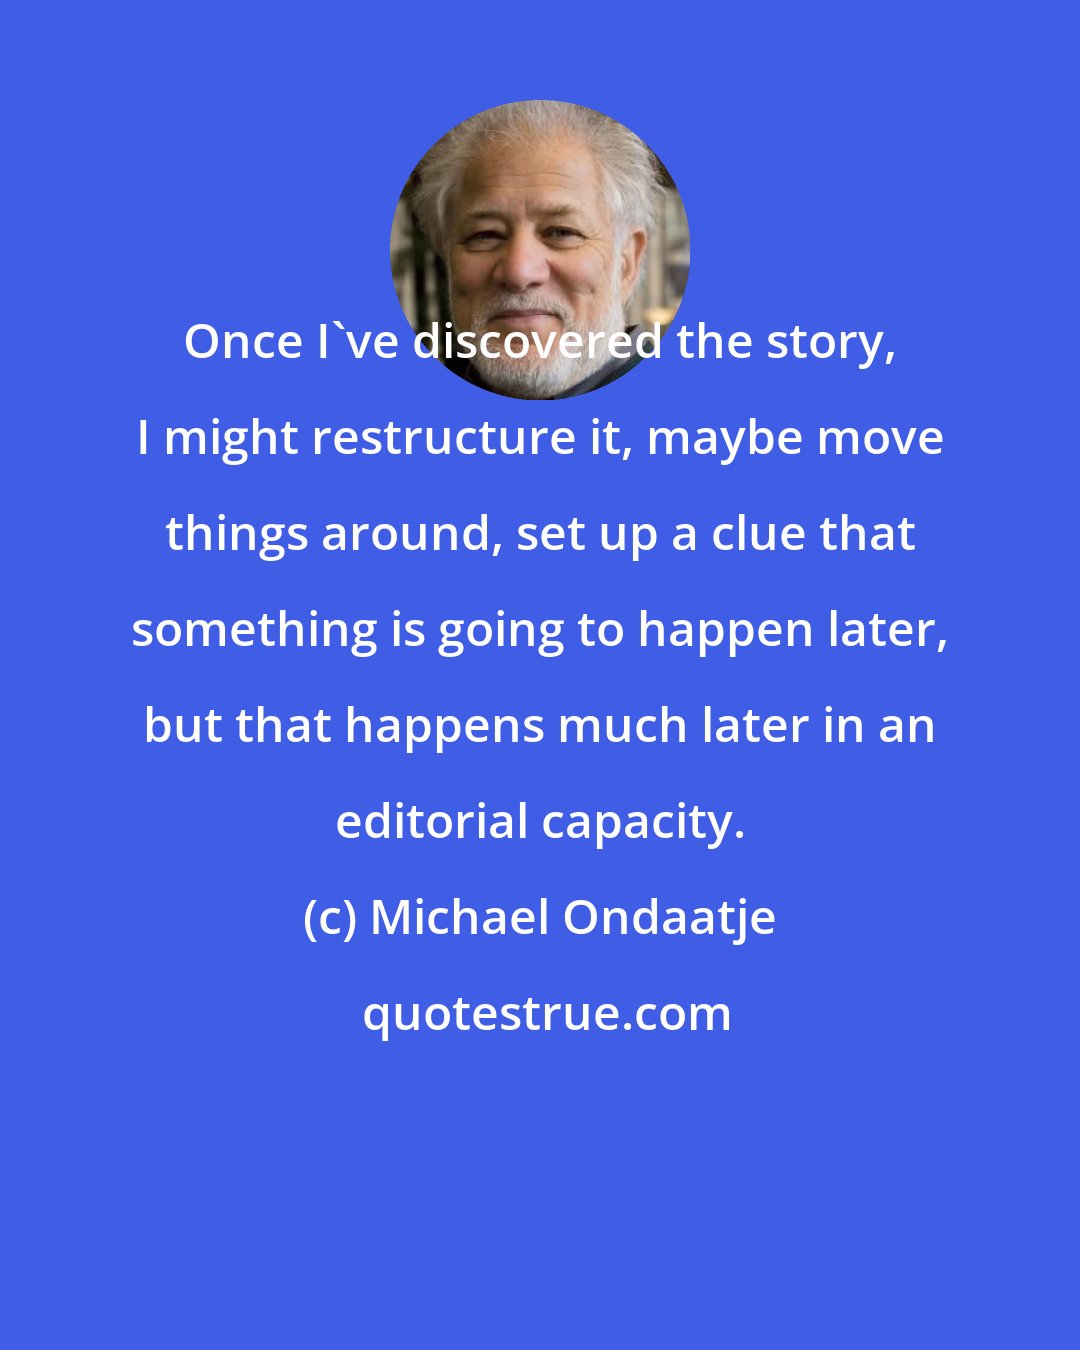 Michael Ondaatje: Once I've discovered the story, I might restructure it, maybe move things around, set up a clue that something is going to happen later, but that happens much later in an editorial capacity.